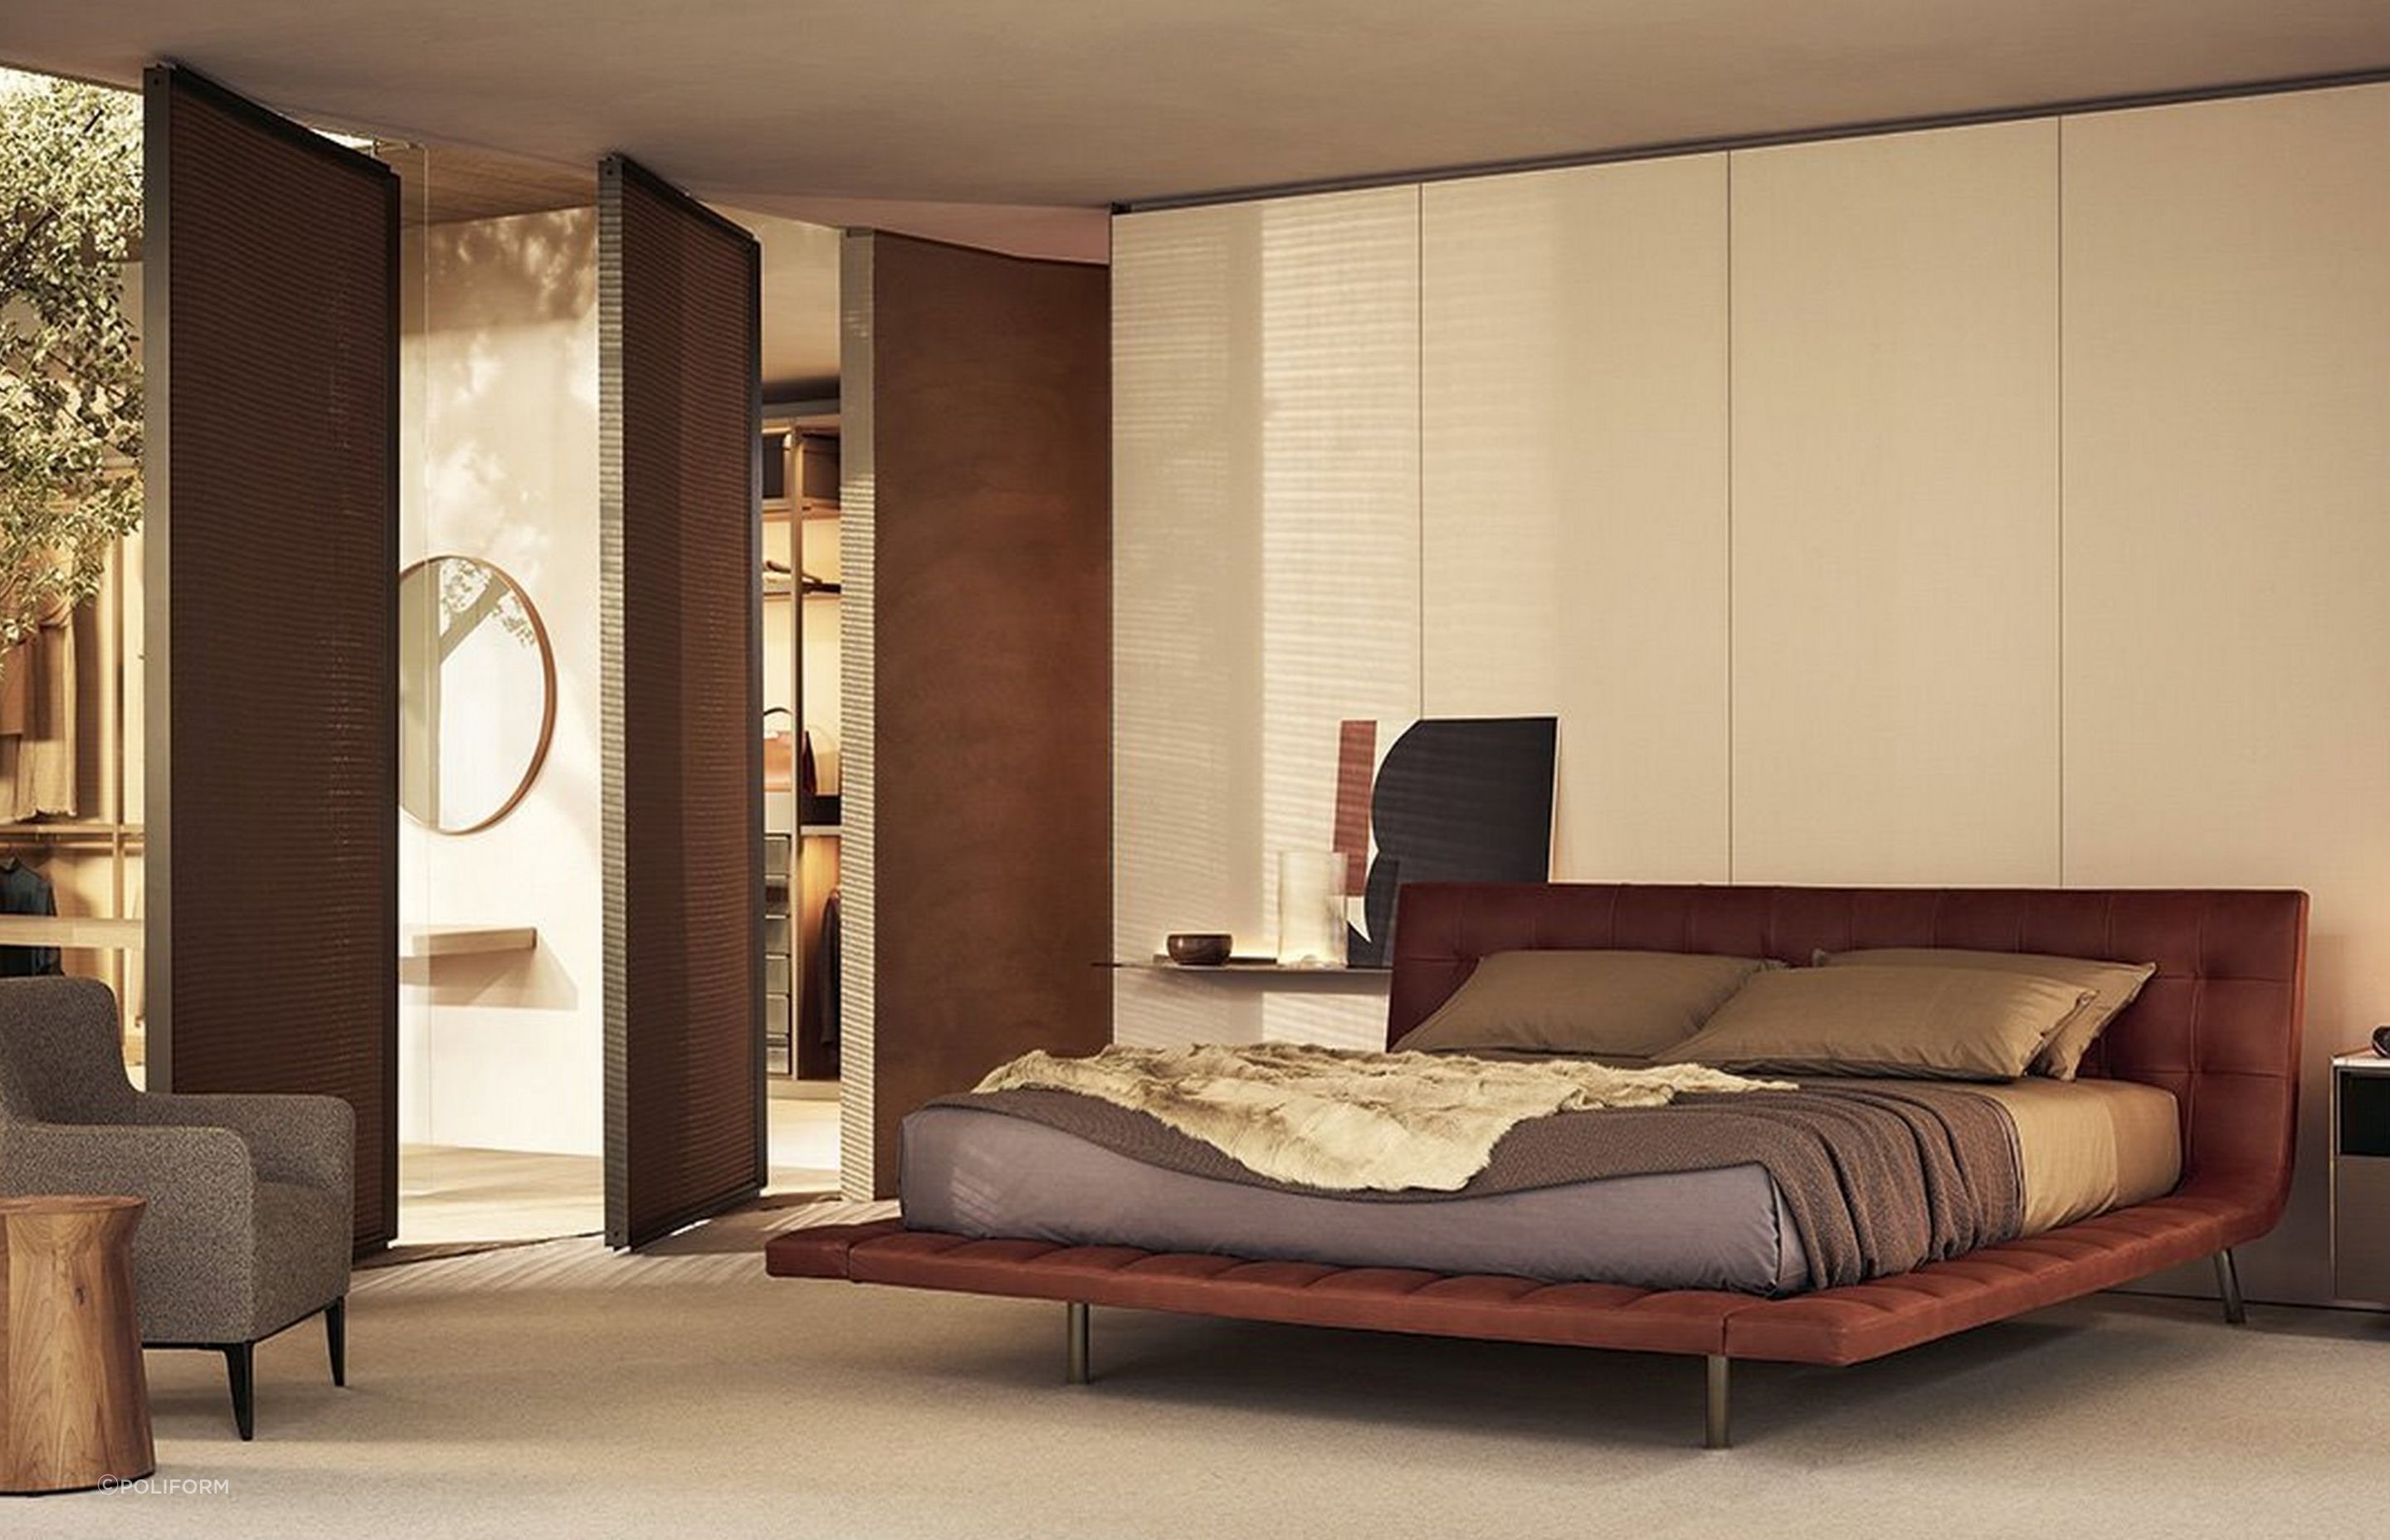 The exquisite Onda Bed takes centre stage in this stylish bedroom